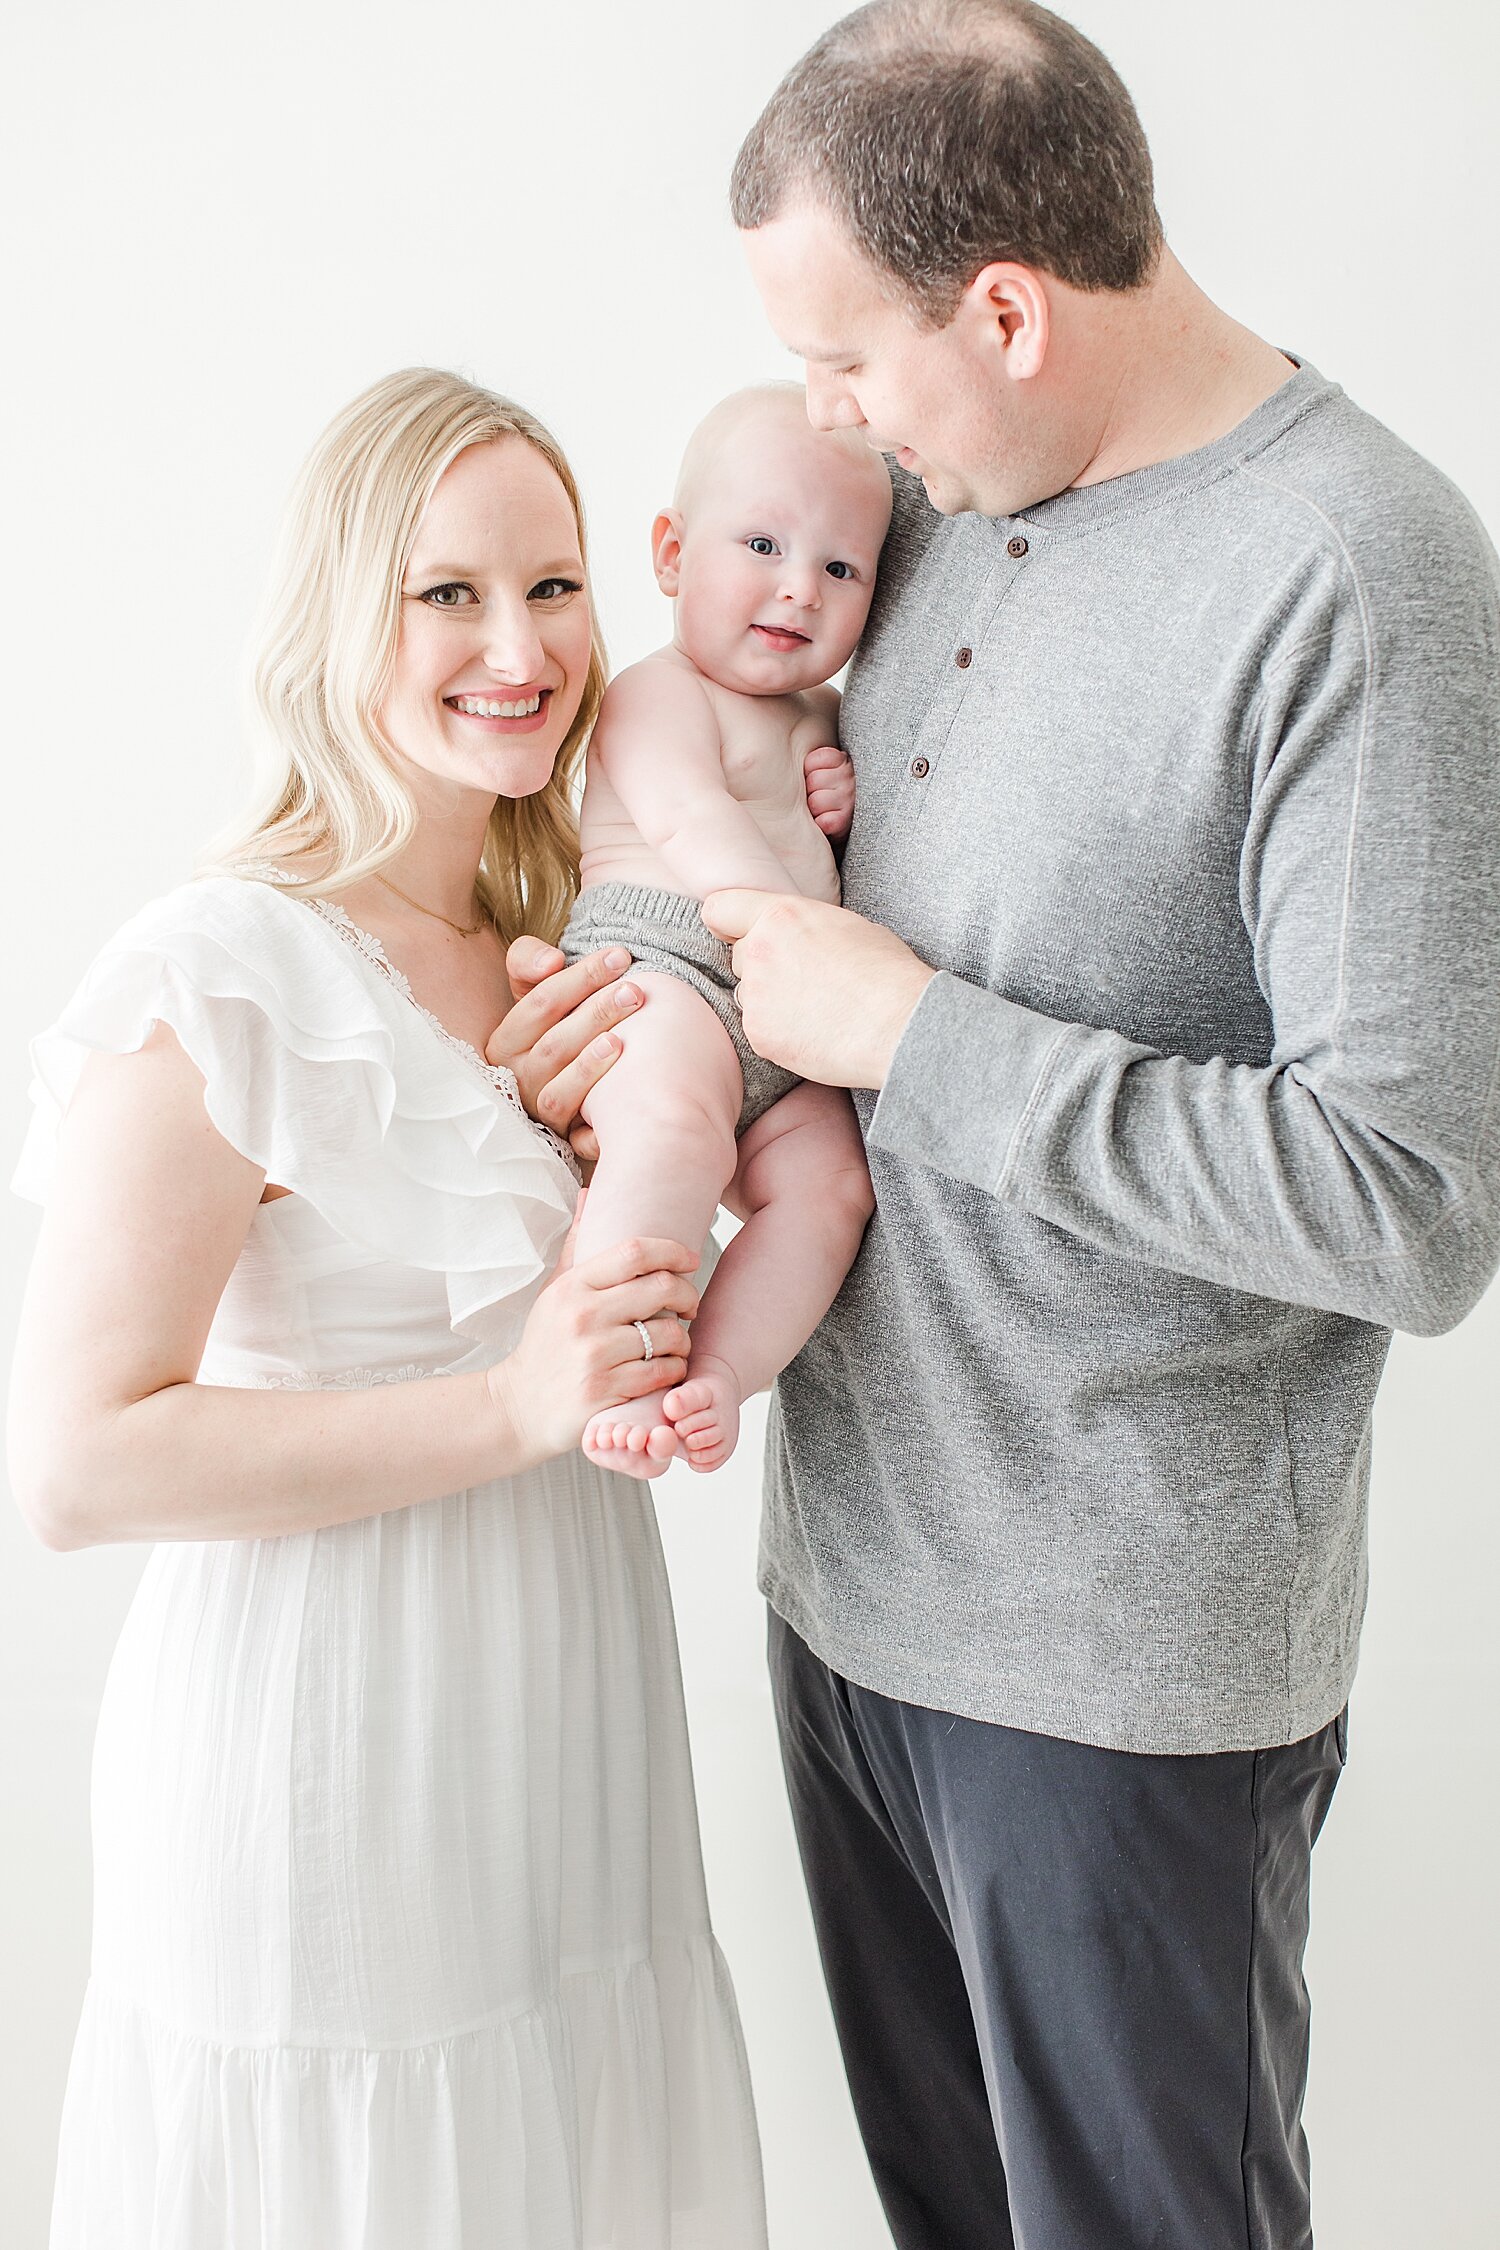 Family portrait during studio milestone session for 8 month old baby boy. Photo by CT Newborn and Family Photographer, Kristin Wood Photography.